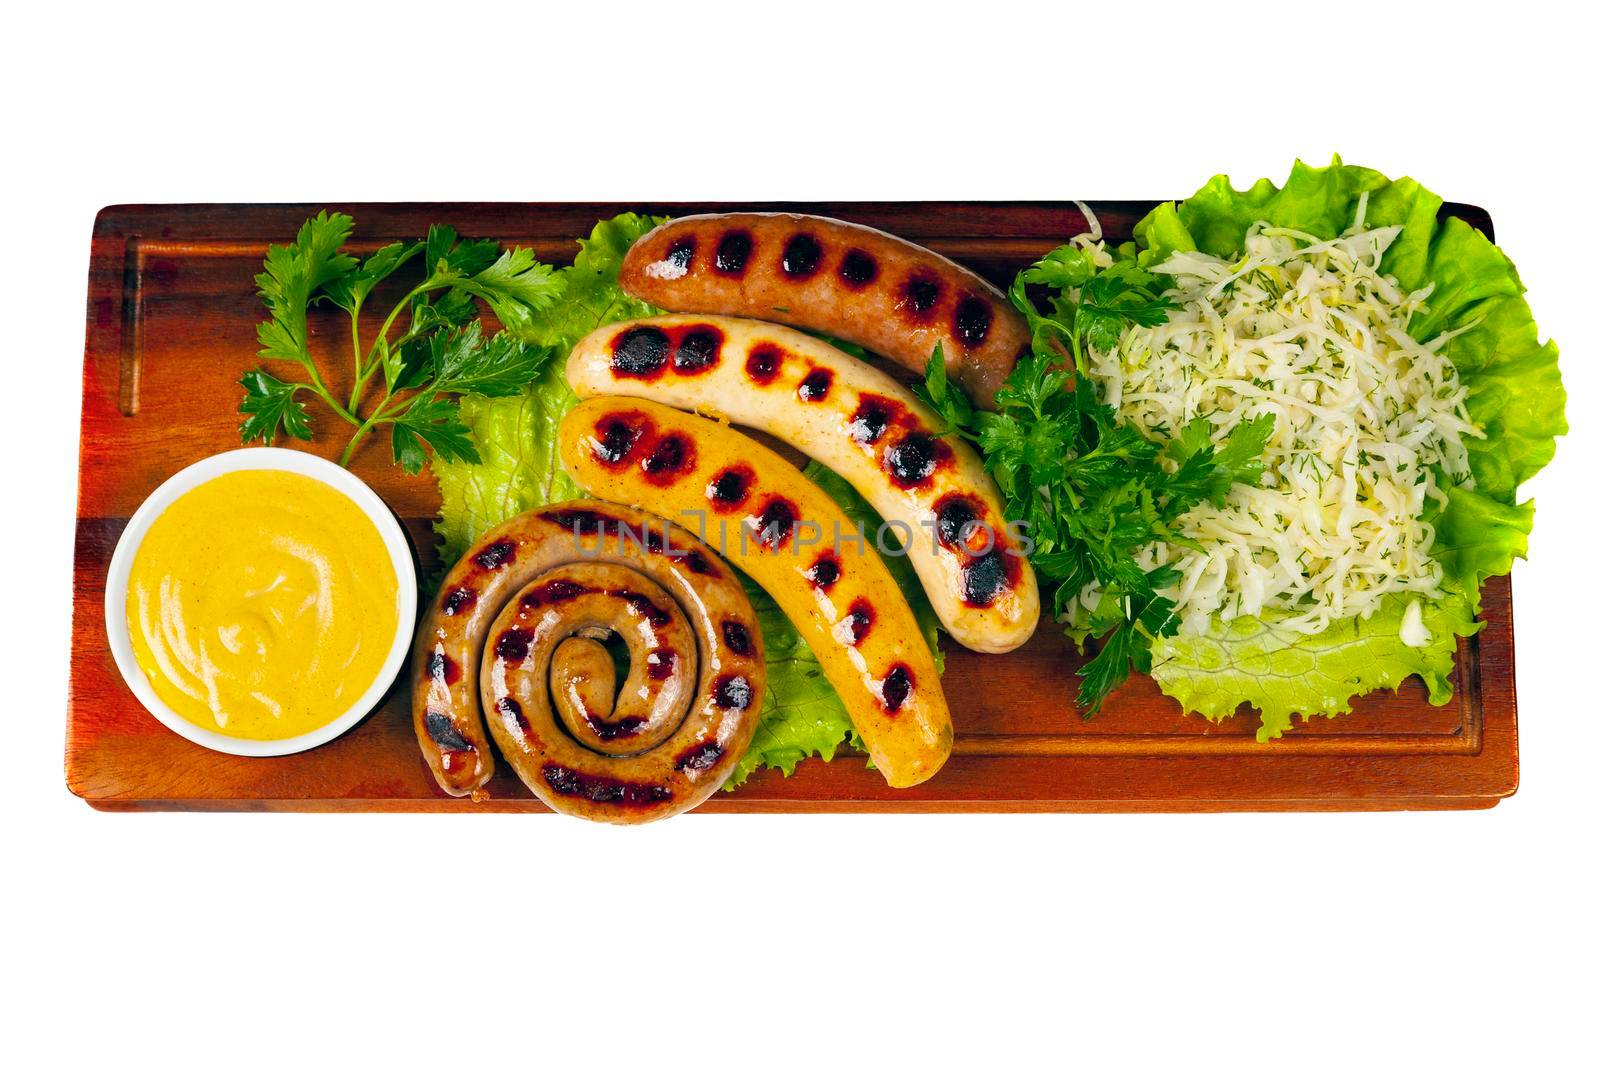 Tasty food on a wooden dish